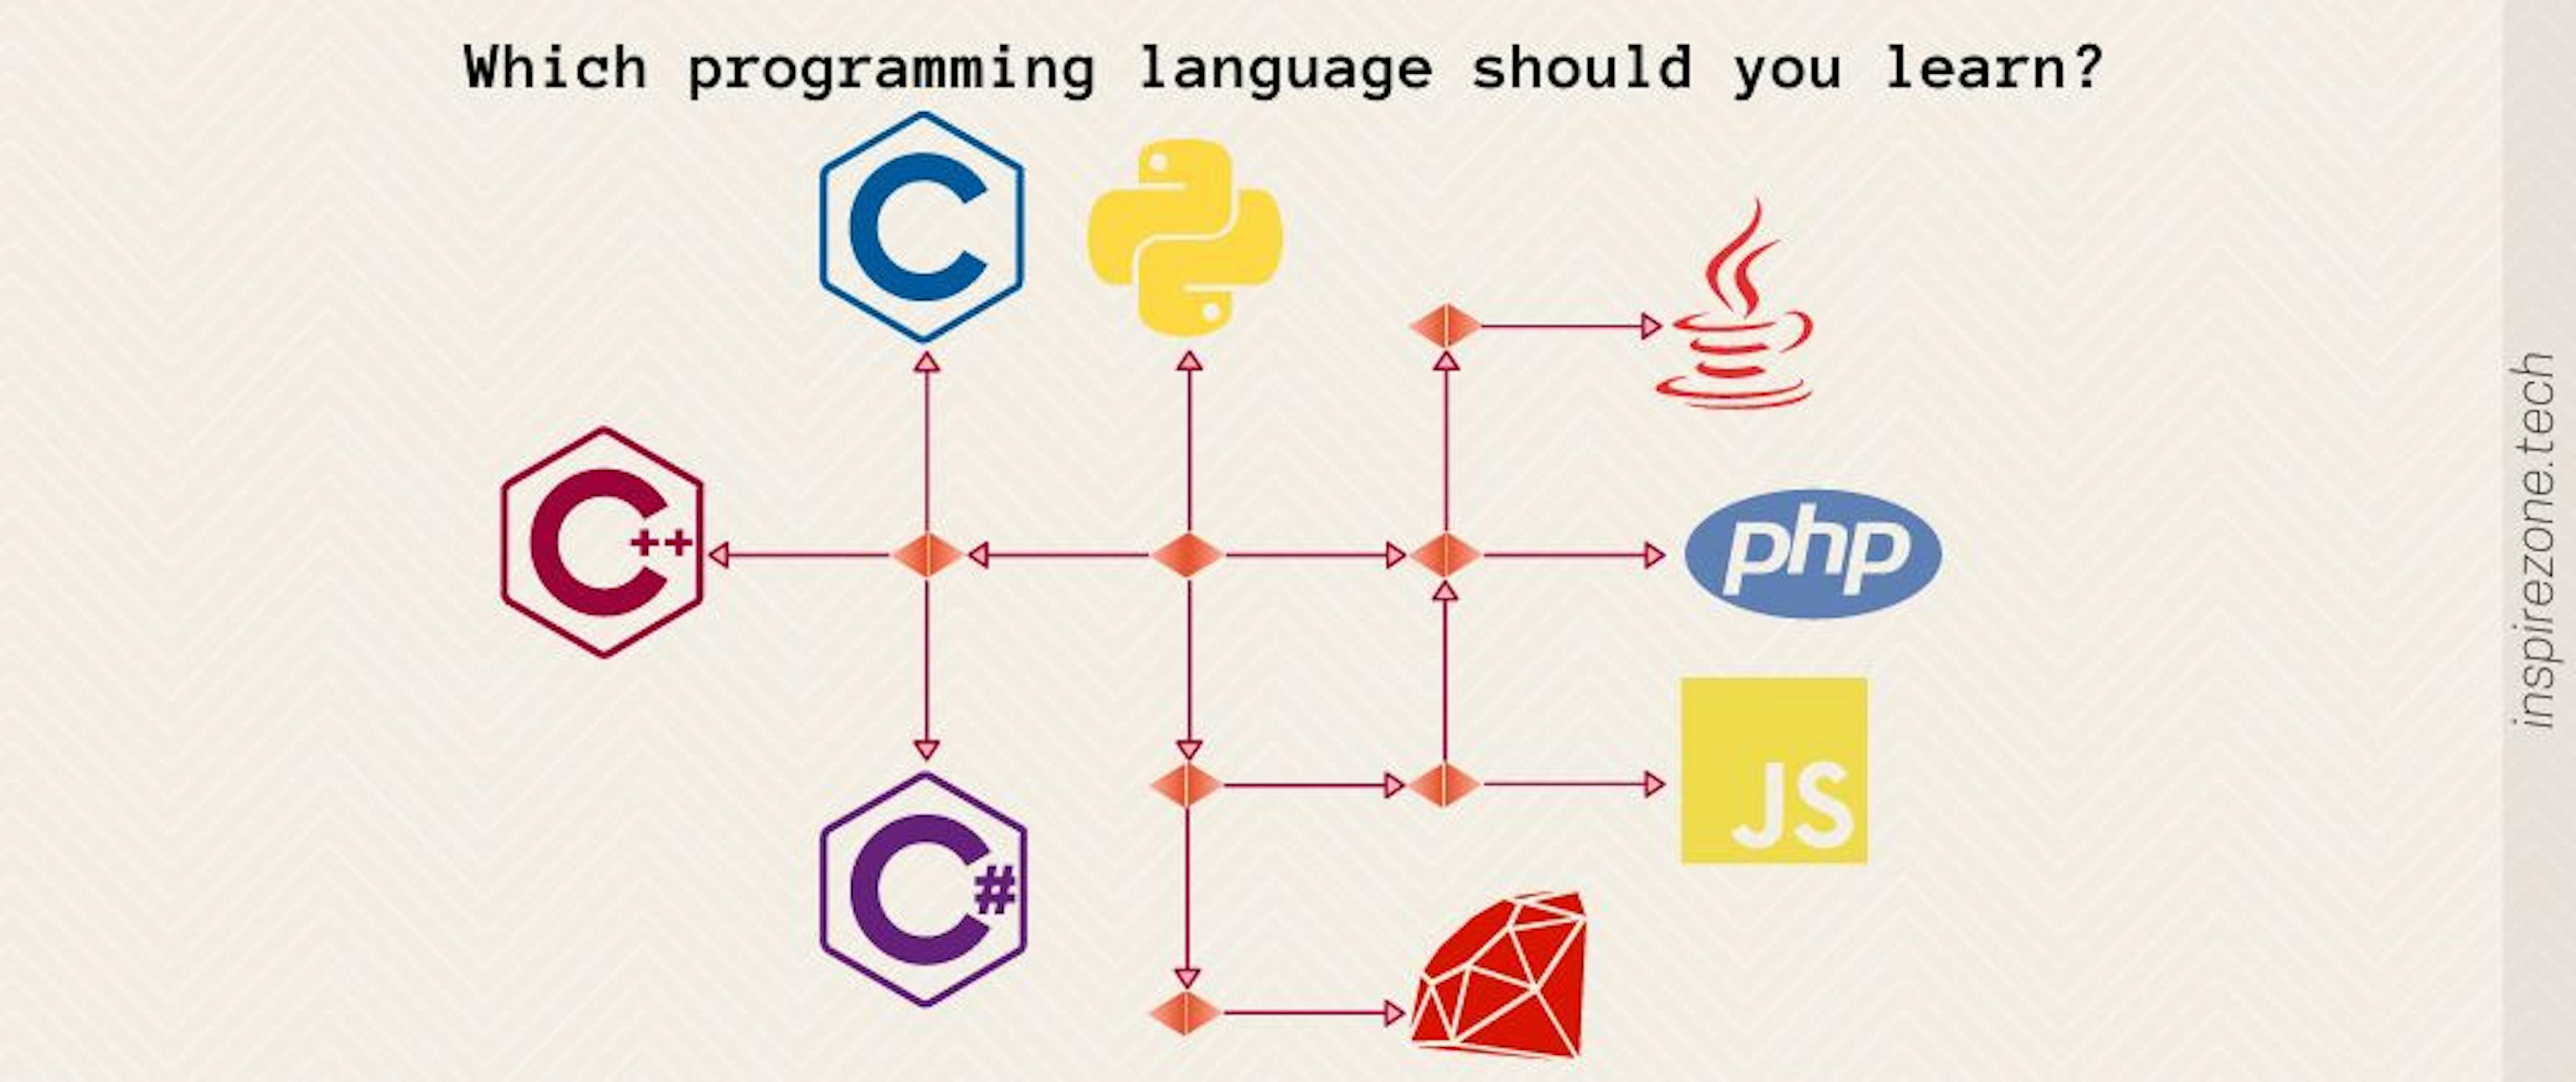 /deciding-on-a-programming-language-to-learn-ask-these-3-key-questions-1th352y feature image